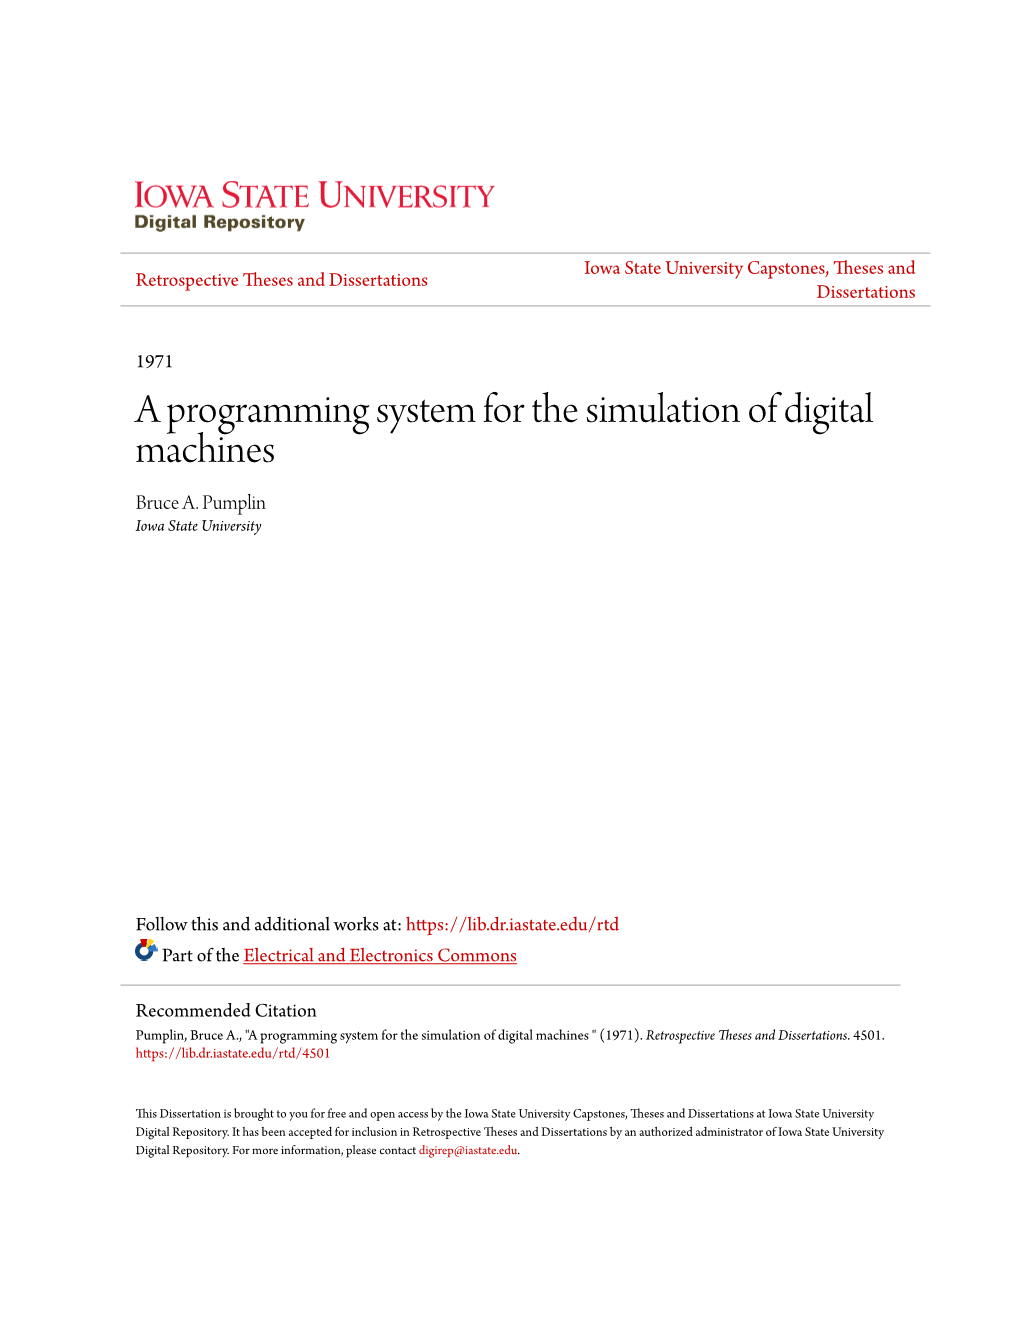 A Programming System for the Simulation of Digital Machines Bruce A